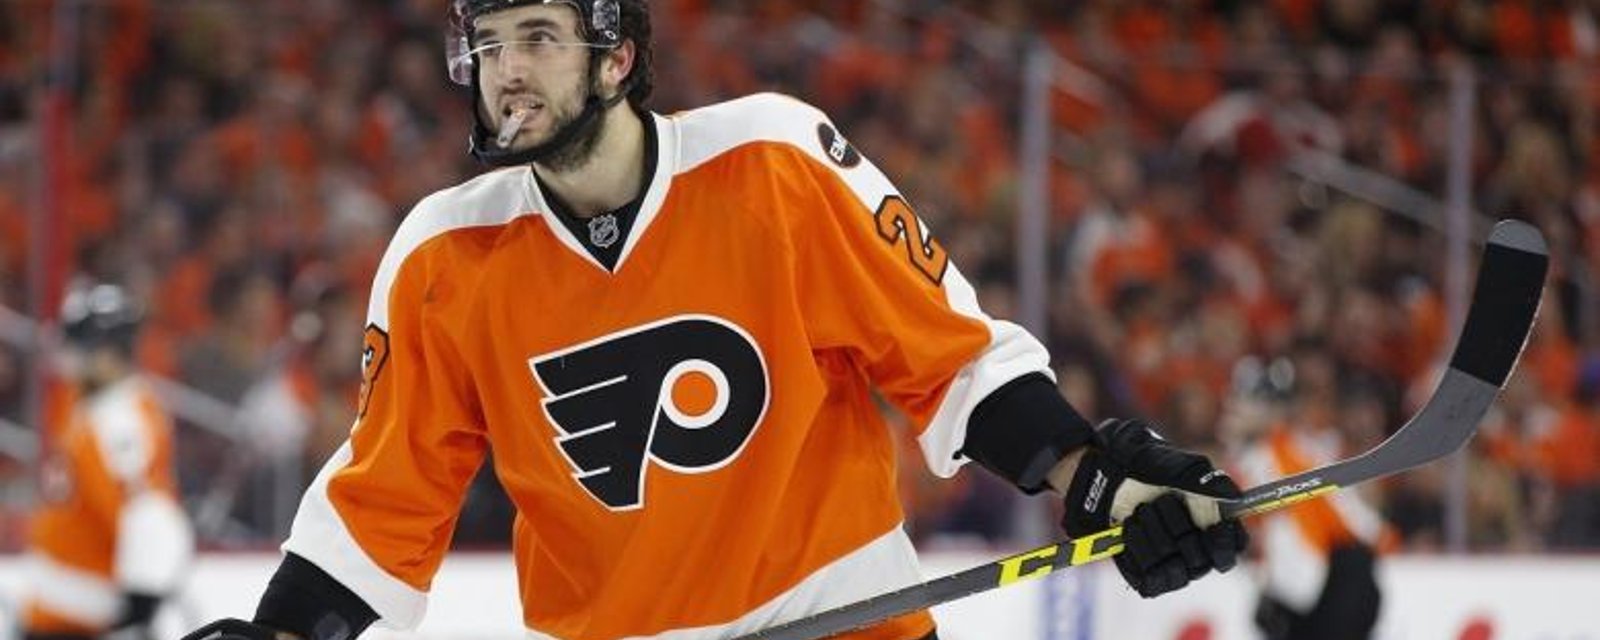 Details of Flyers new contract with Manning points to motivations behind the deal.